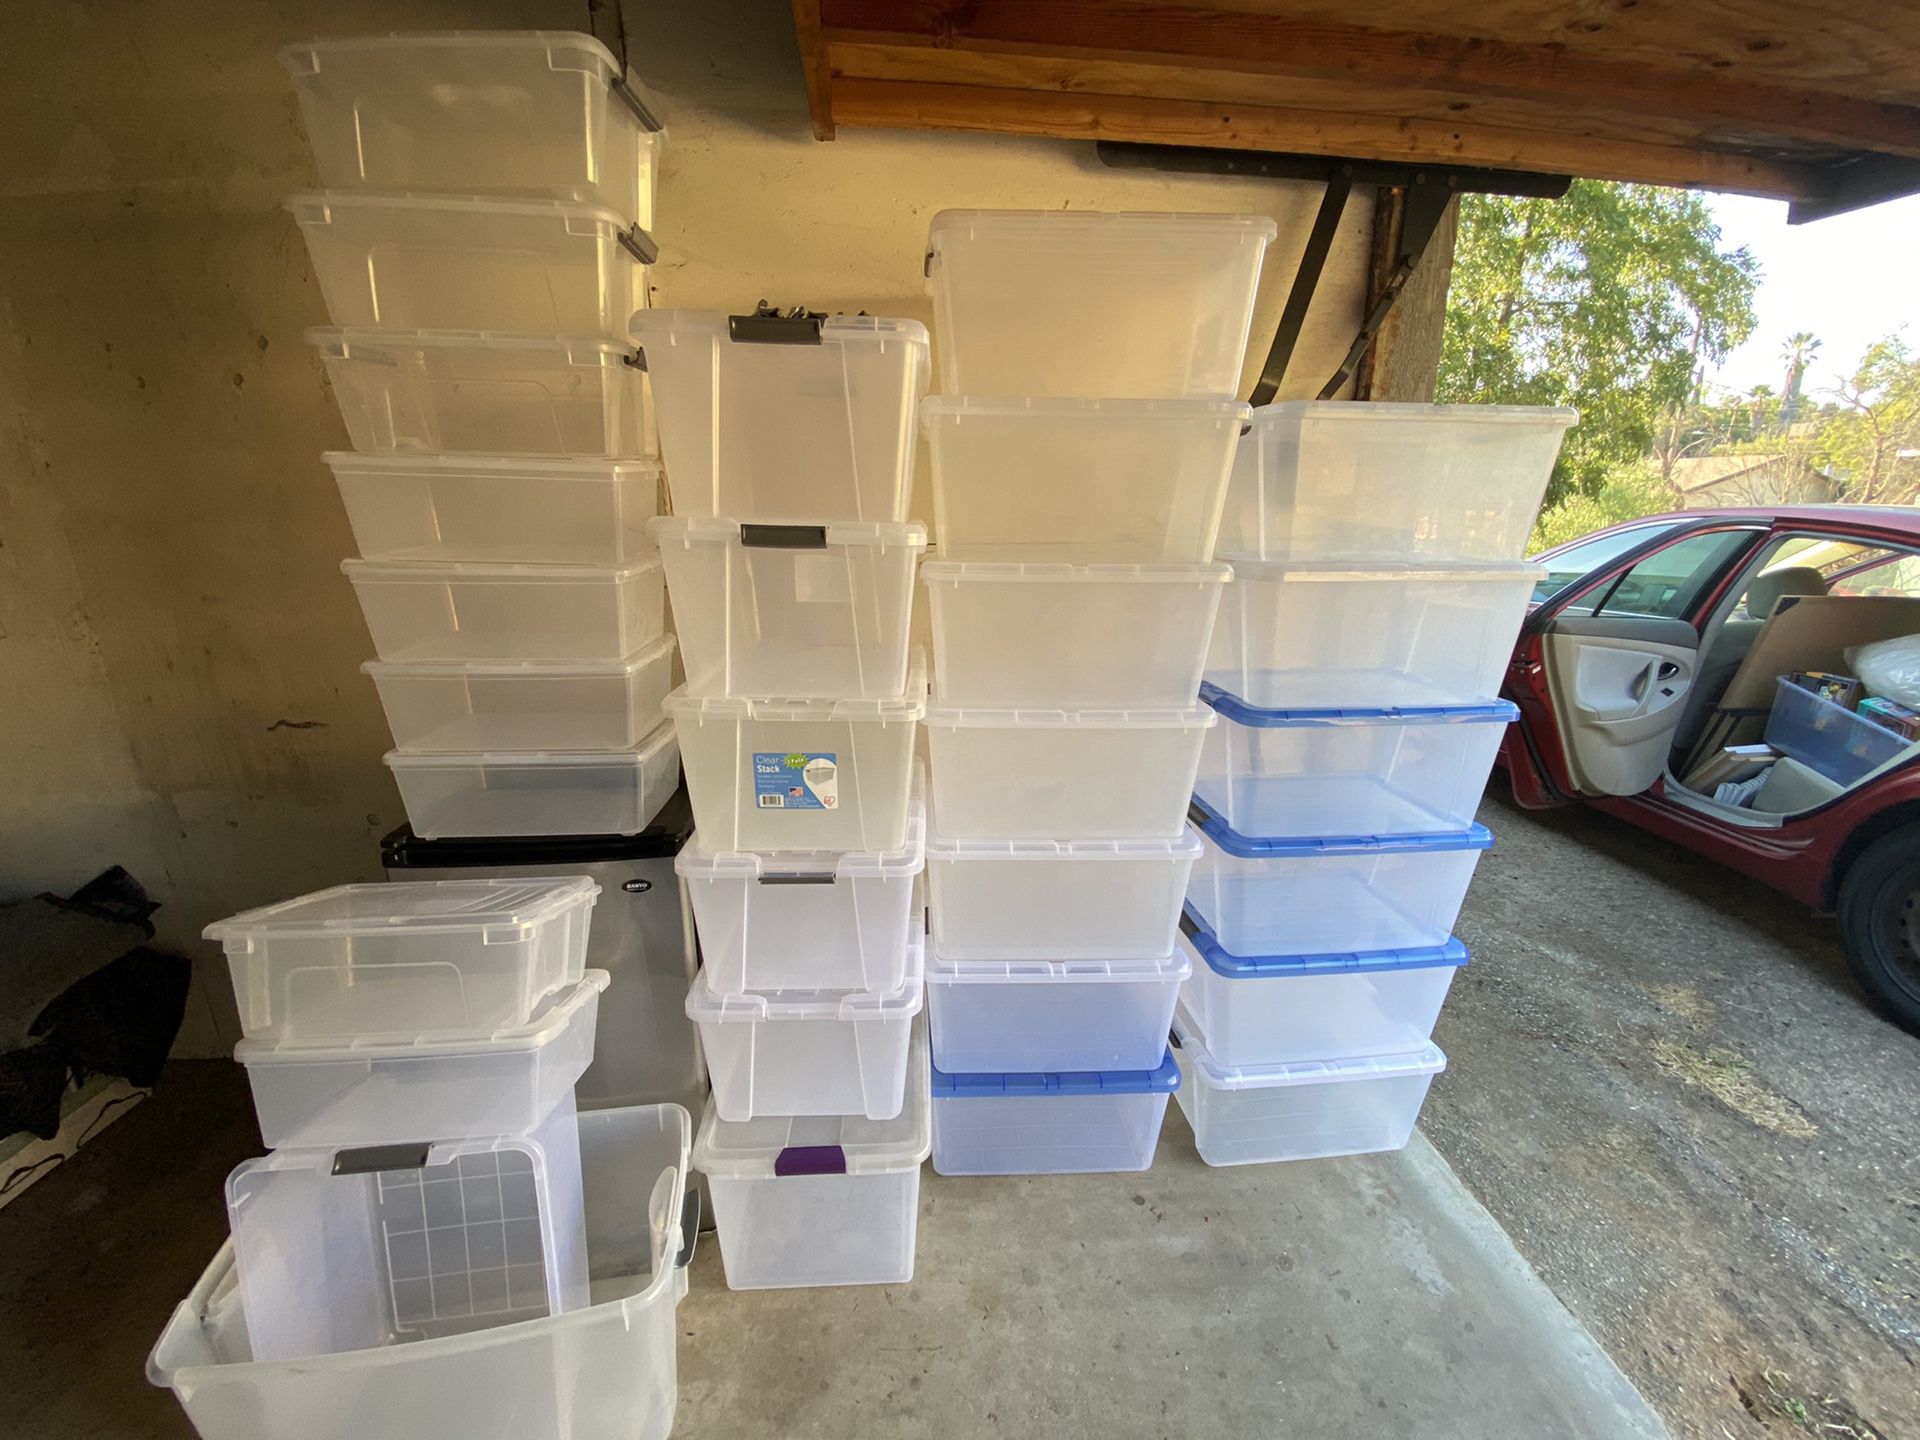 28 Plastic Storage Containers In Good Condition